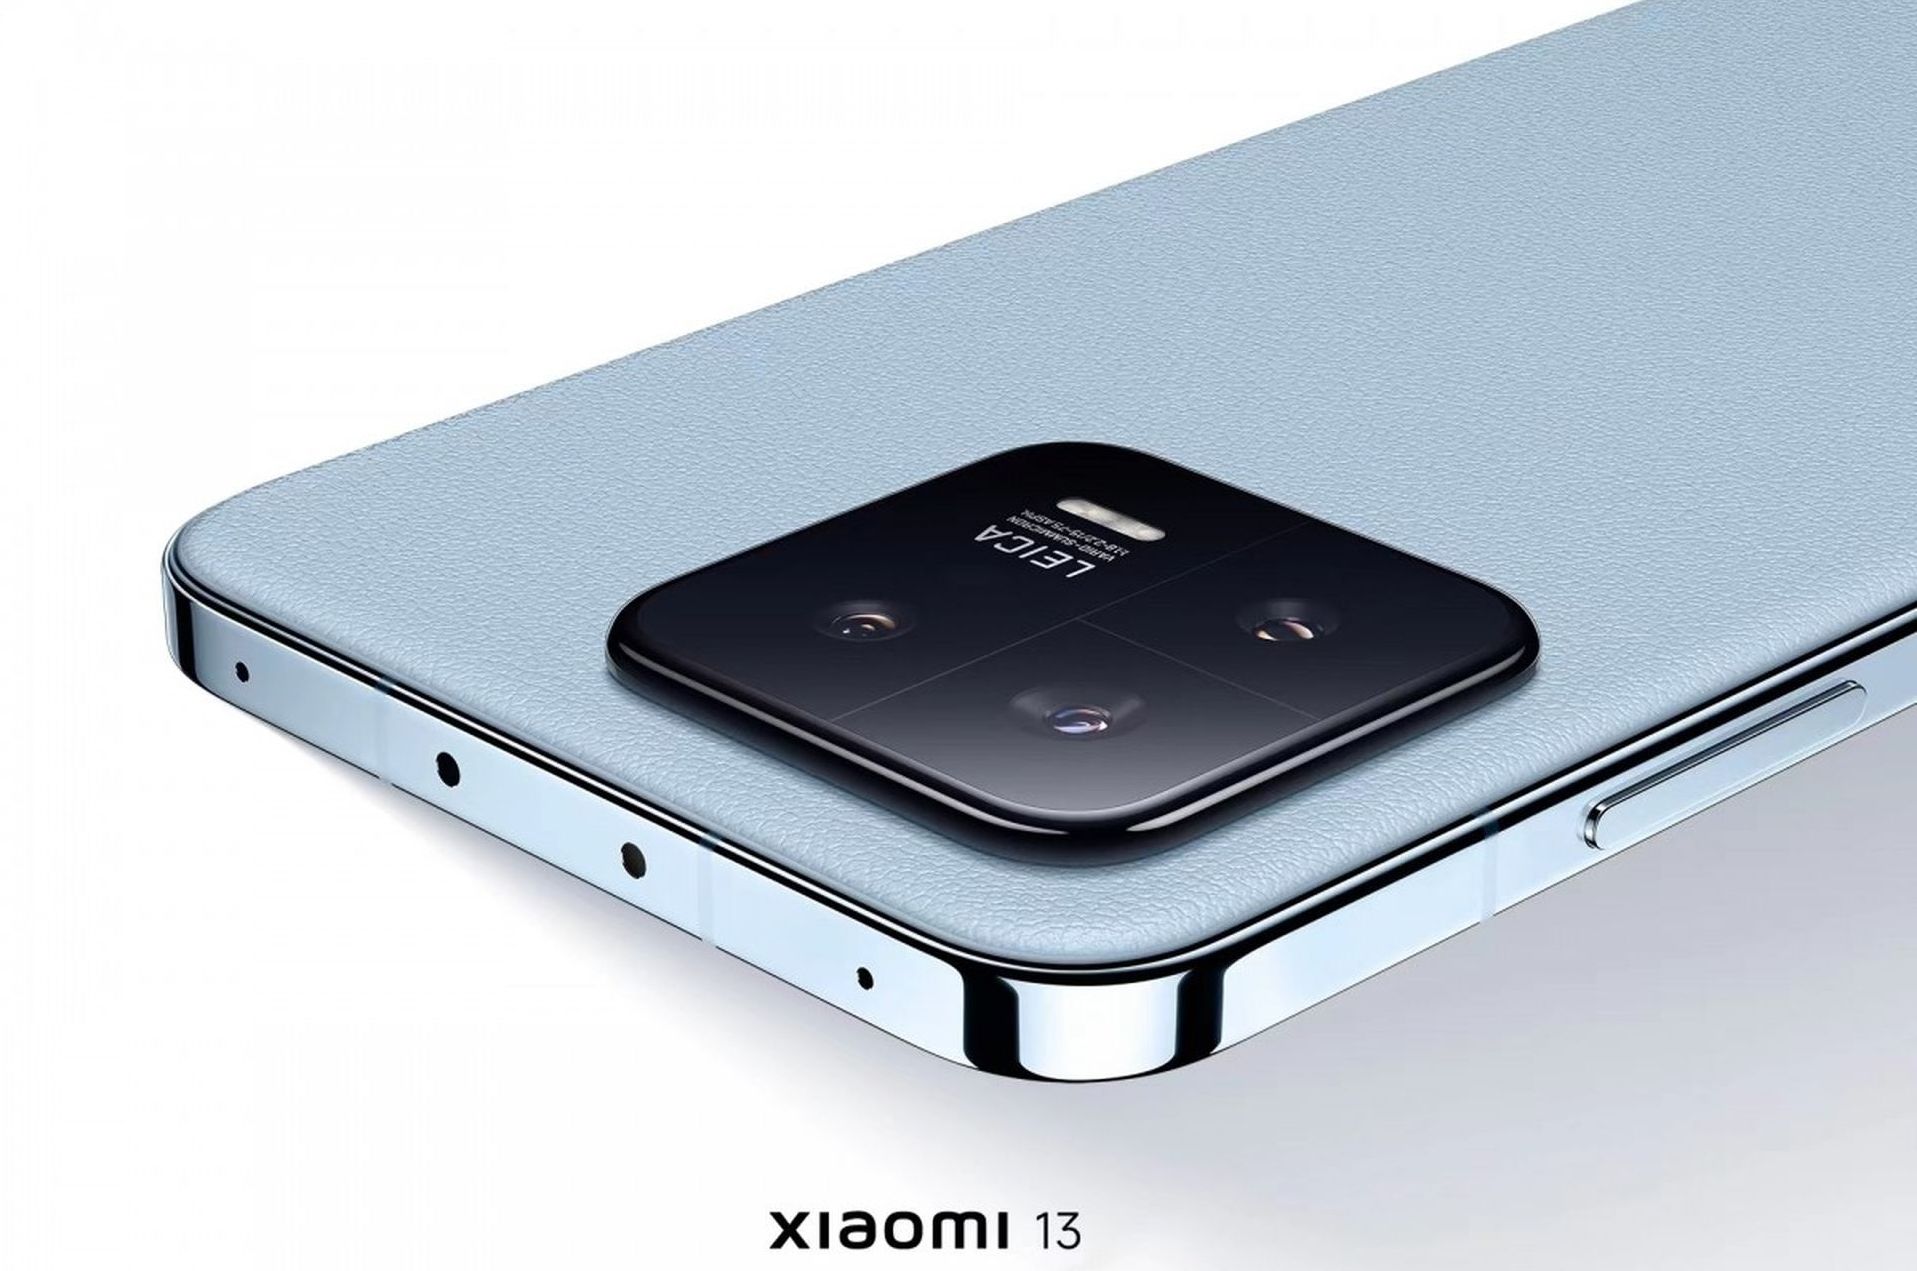 Xiaomi 13 Pro and Xiaomi 13: Specs, price and release date